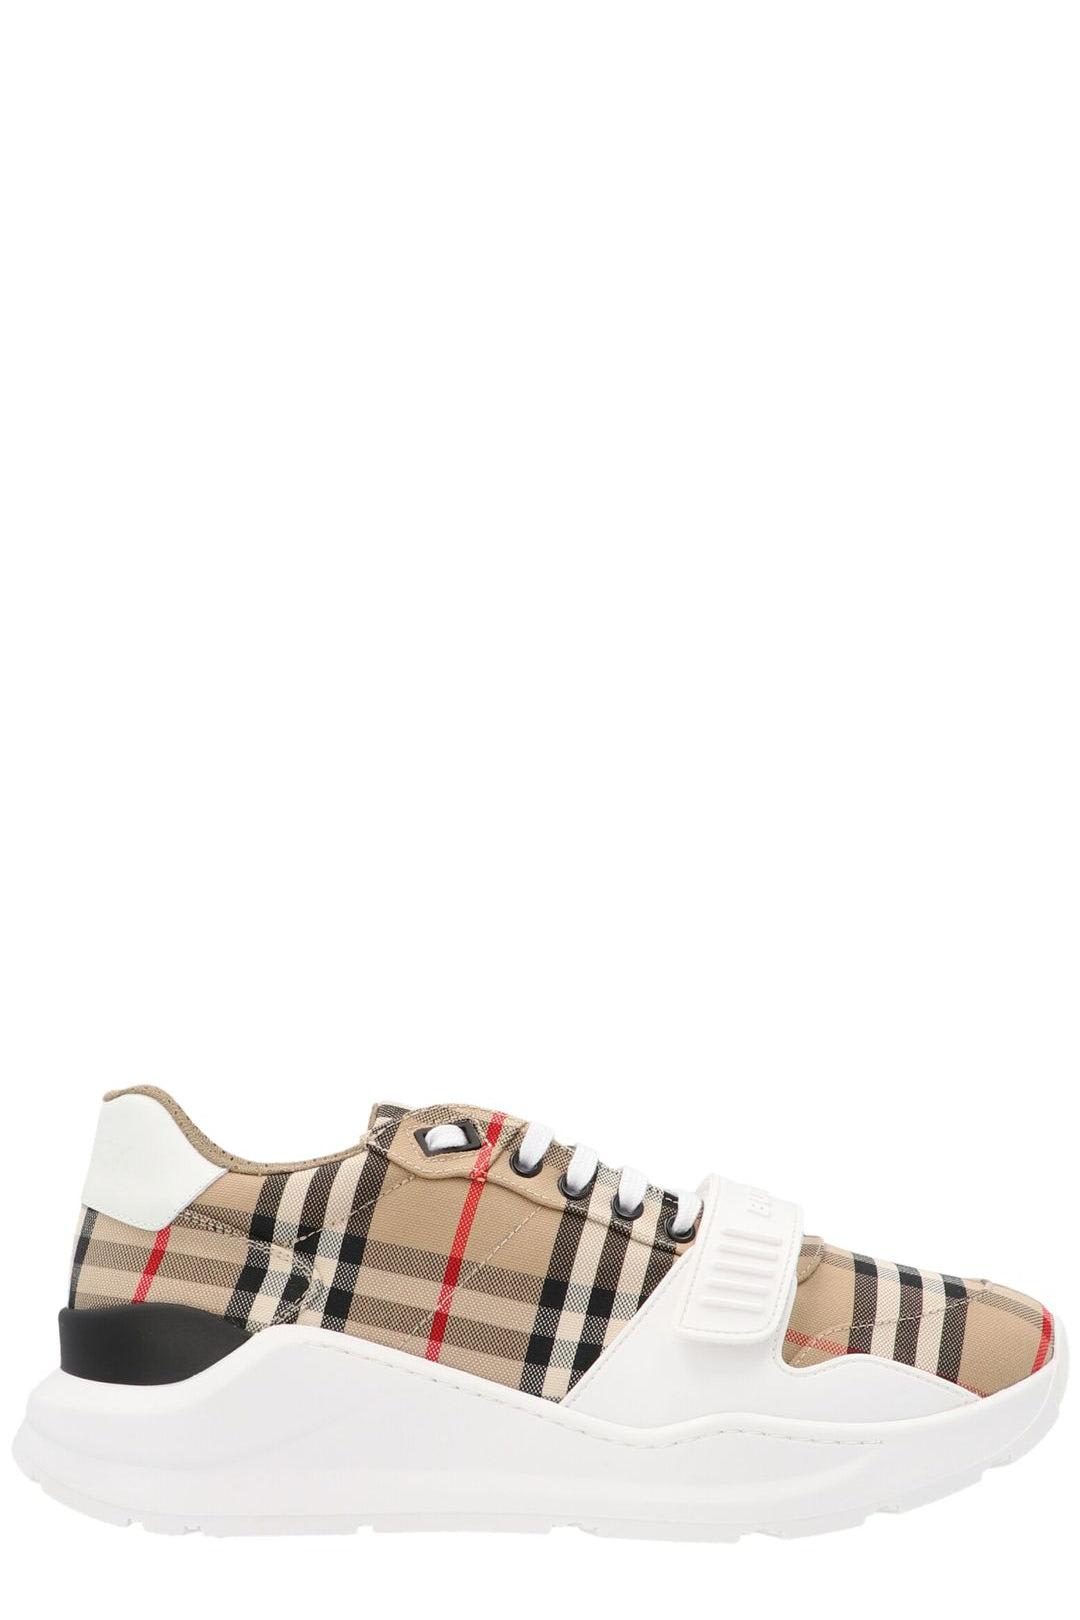 Burberry Vintage Checked Lace-up Sneakers